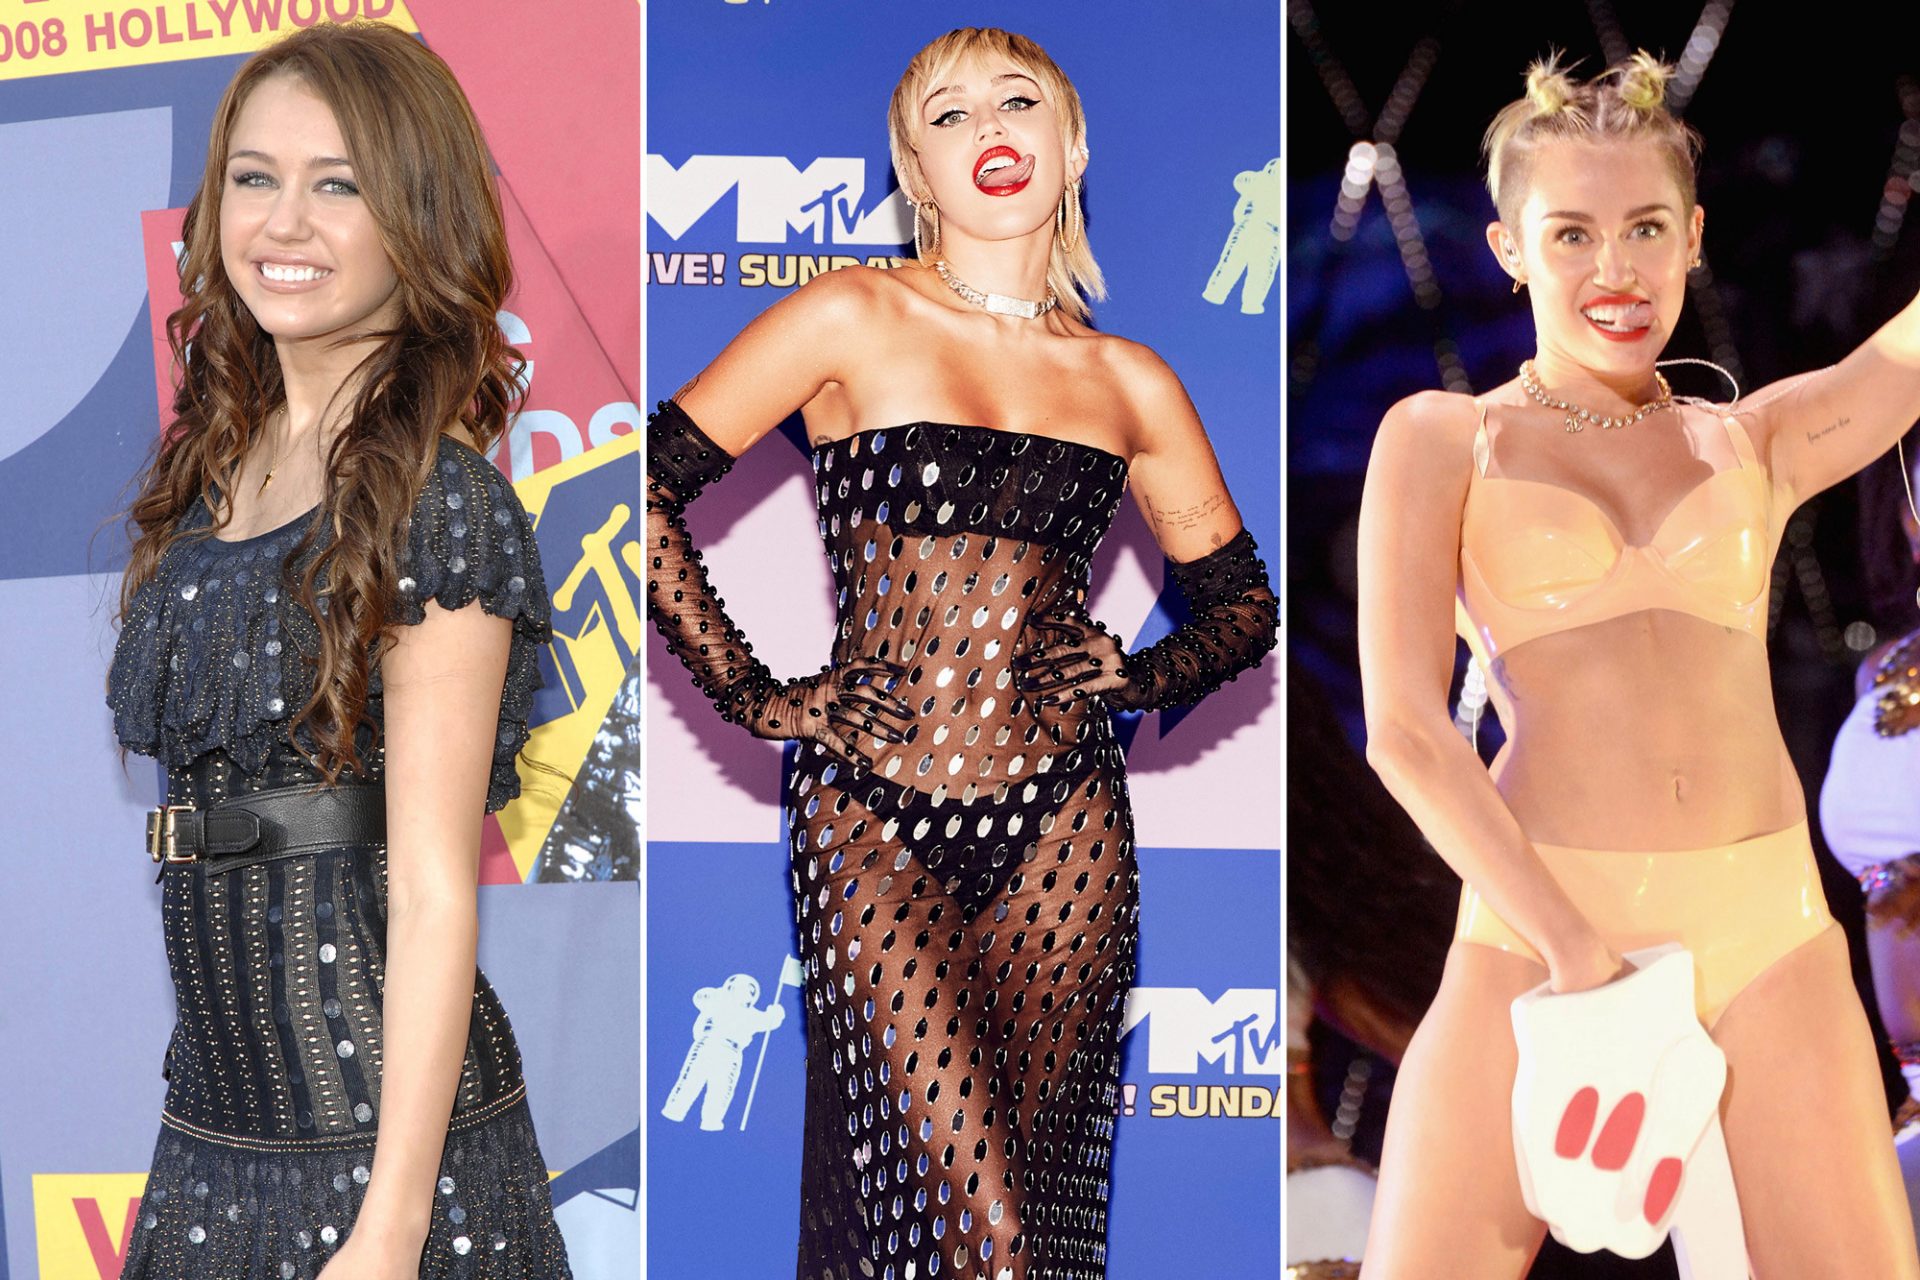 Miley Cyrus’ wildest VMAs outfits via the years